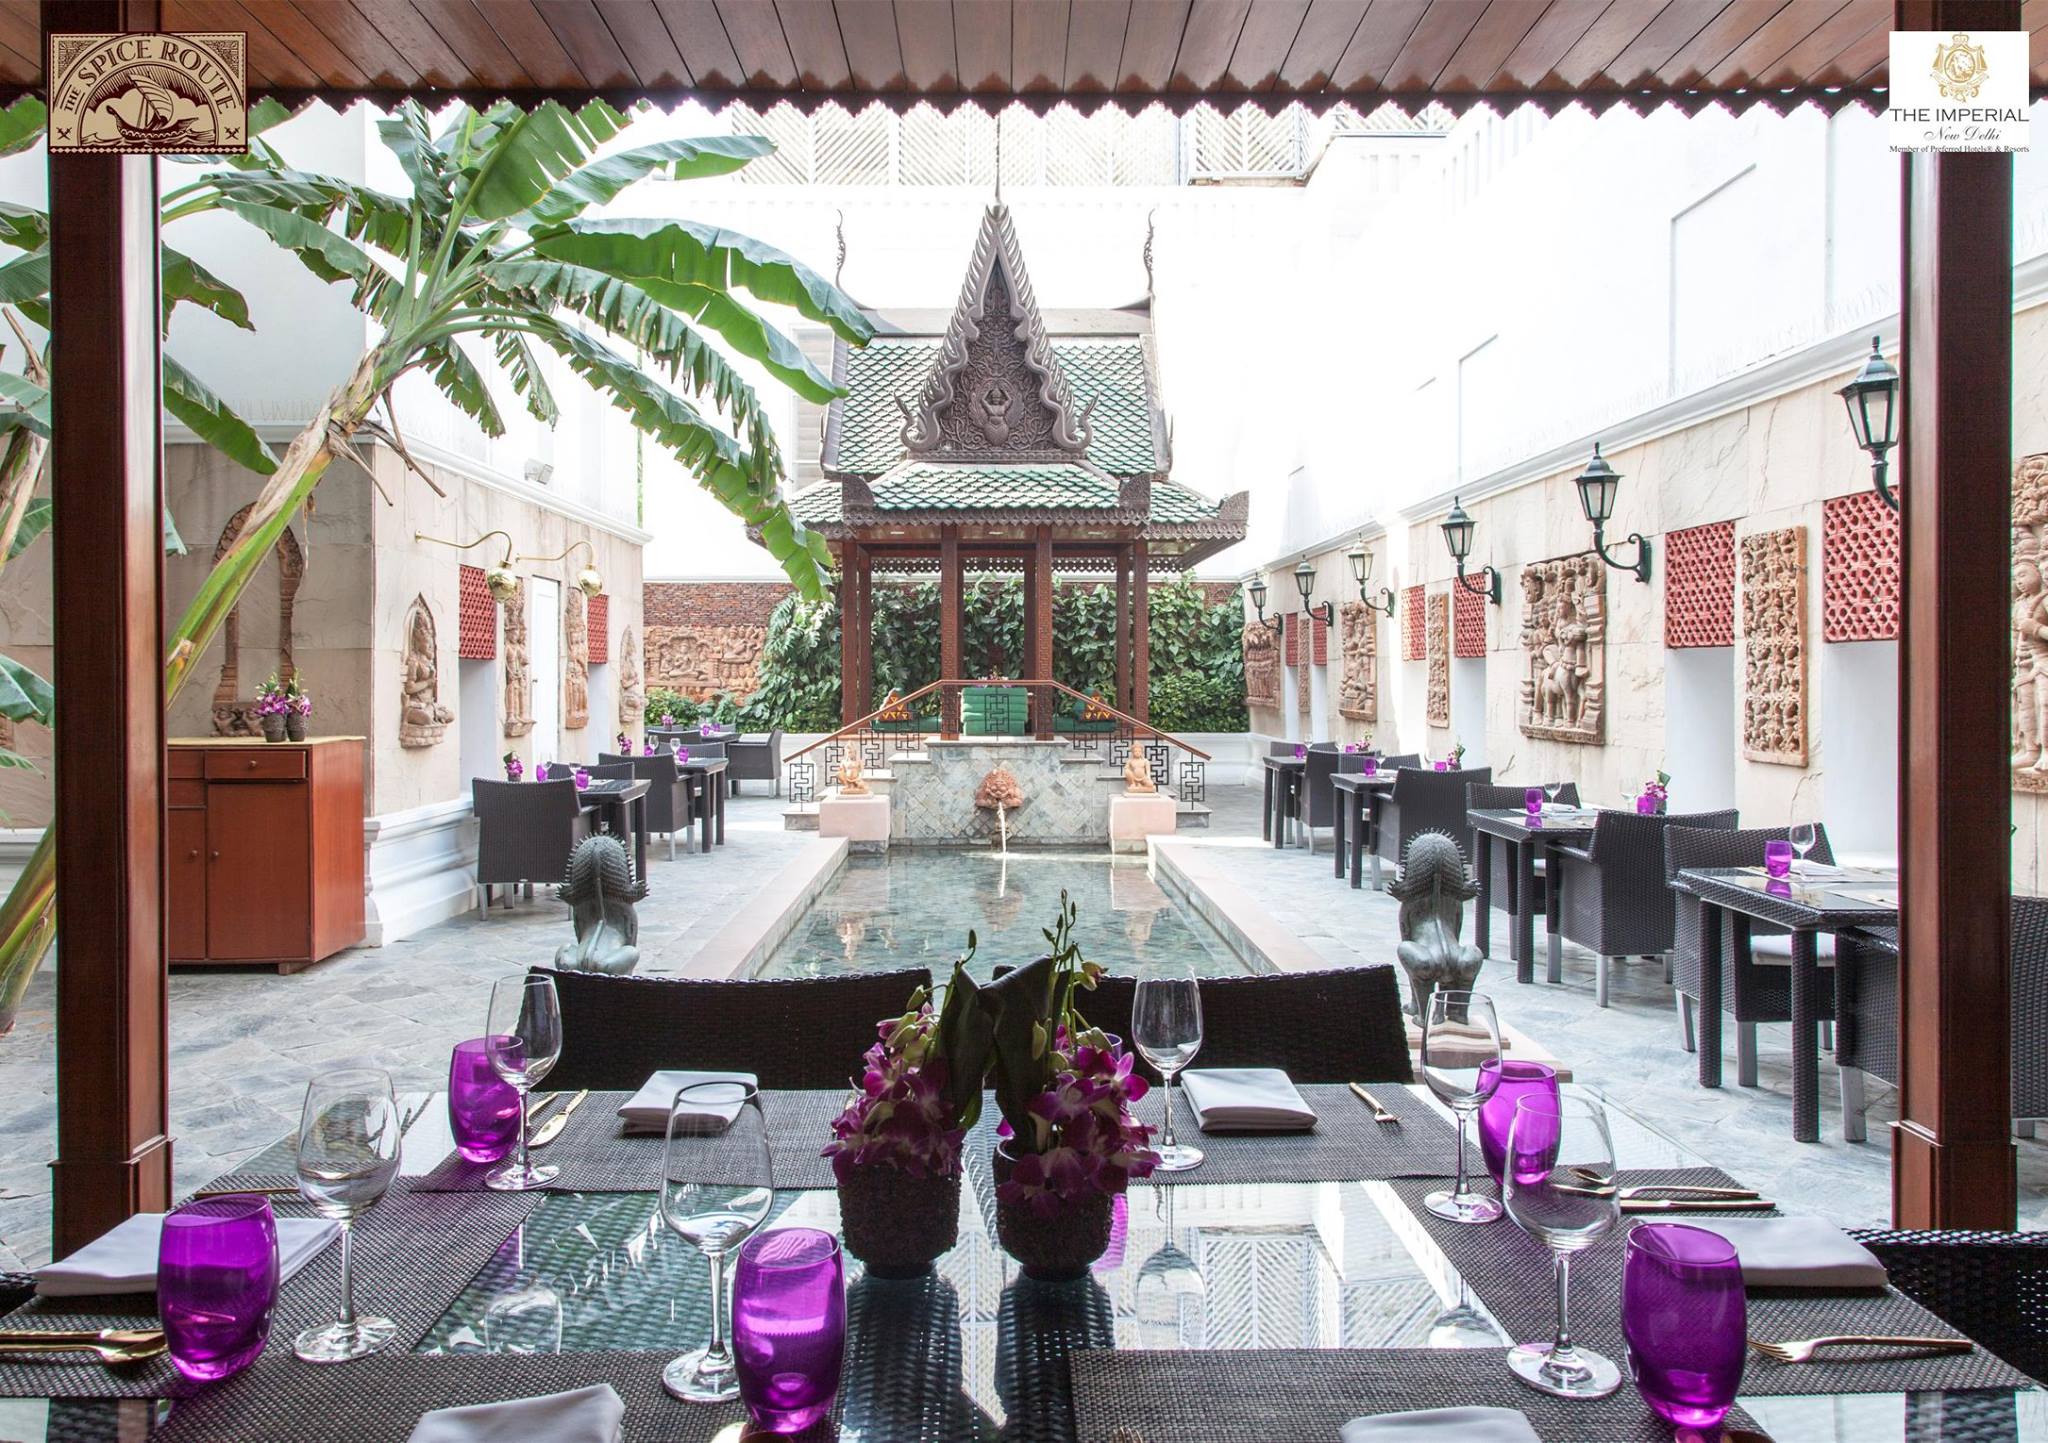 restaurant spice route the imperial new delhi inde par the imperial india